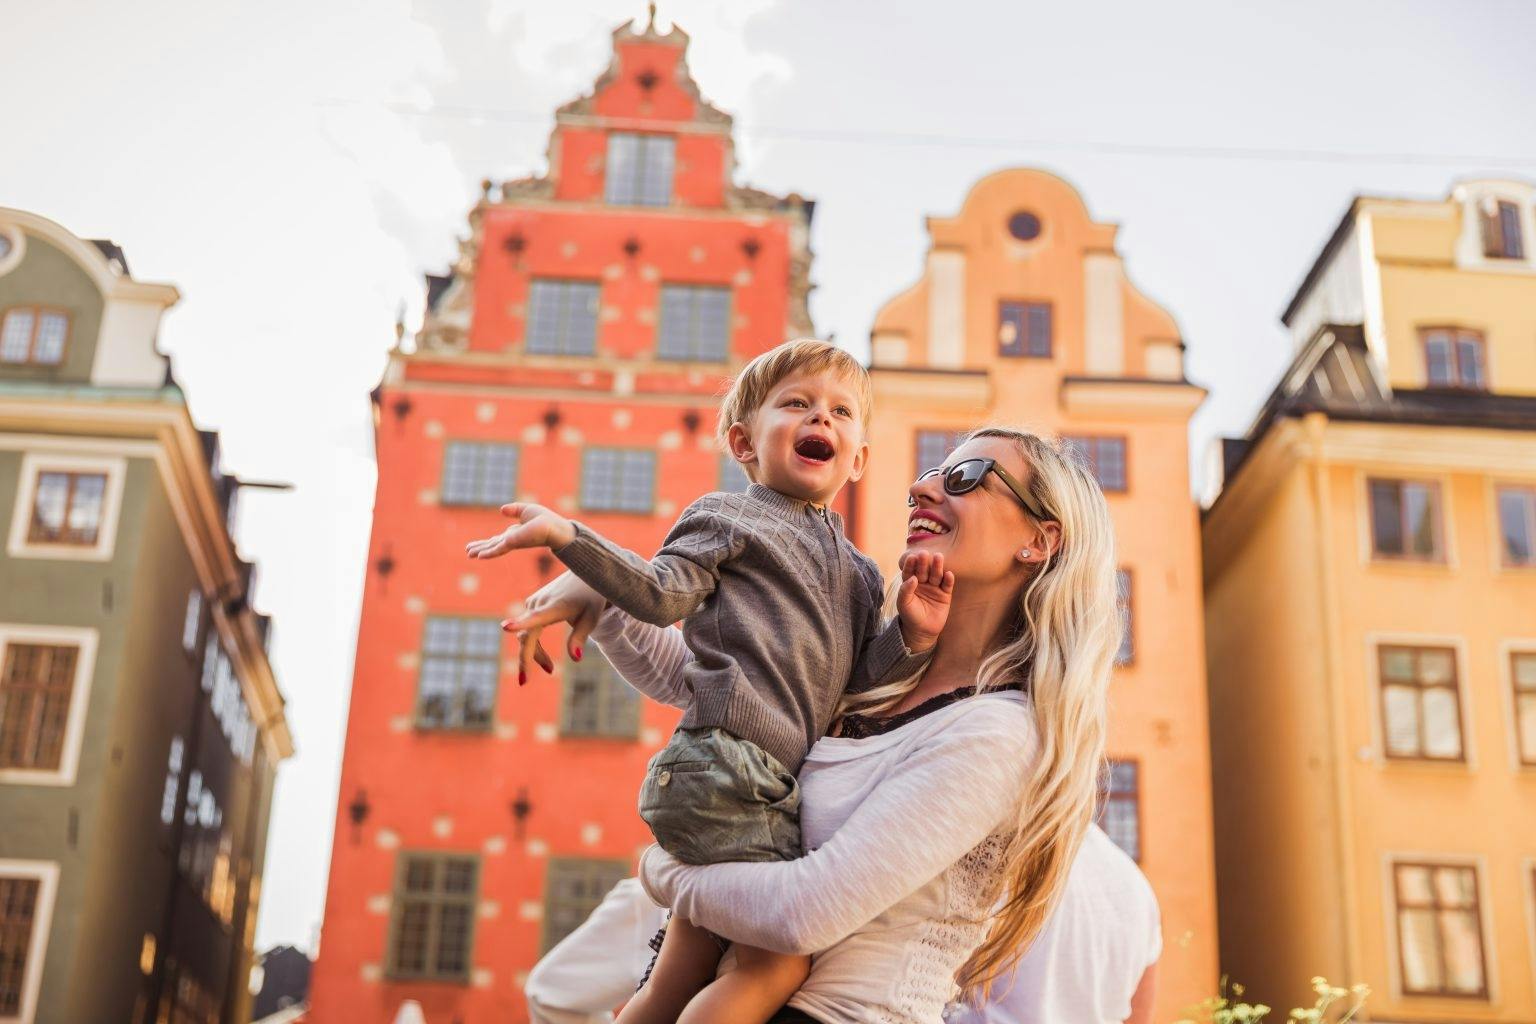 The best of Stockholm walking tour